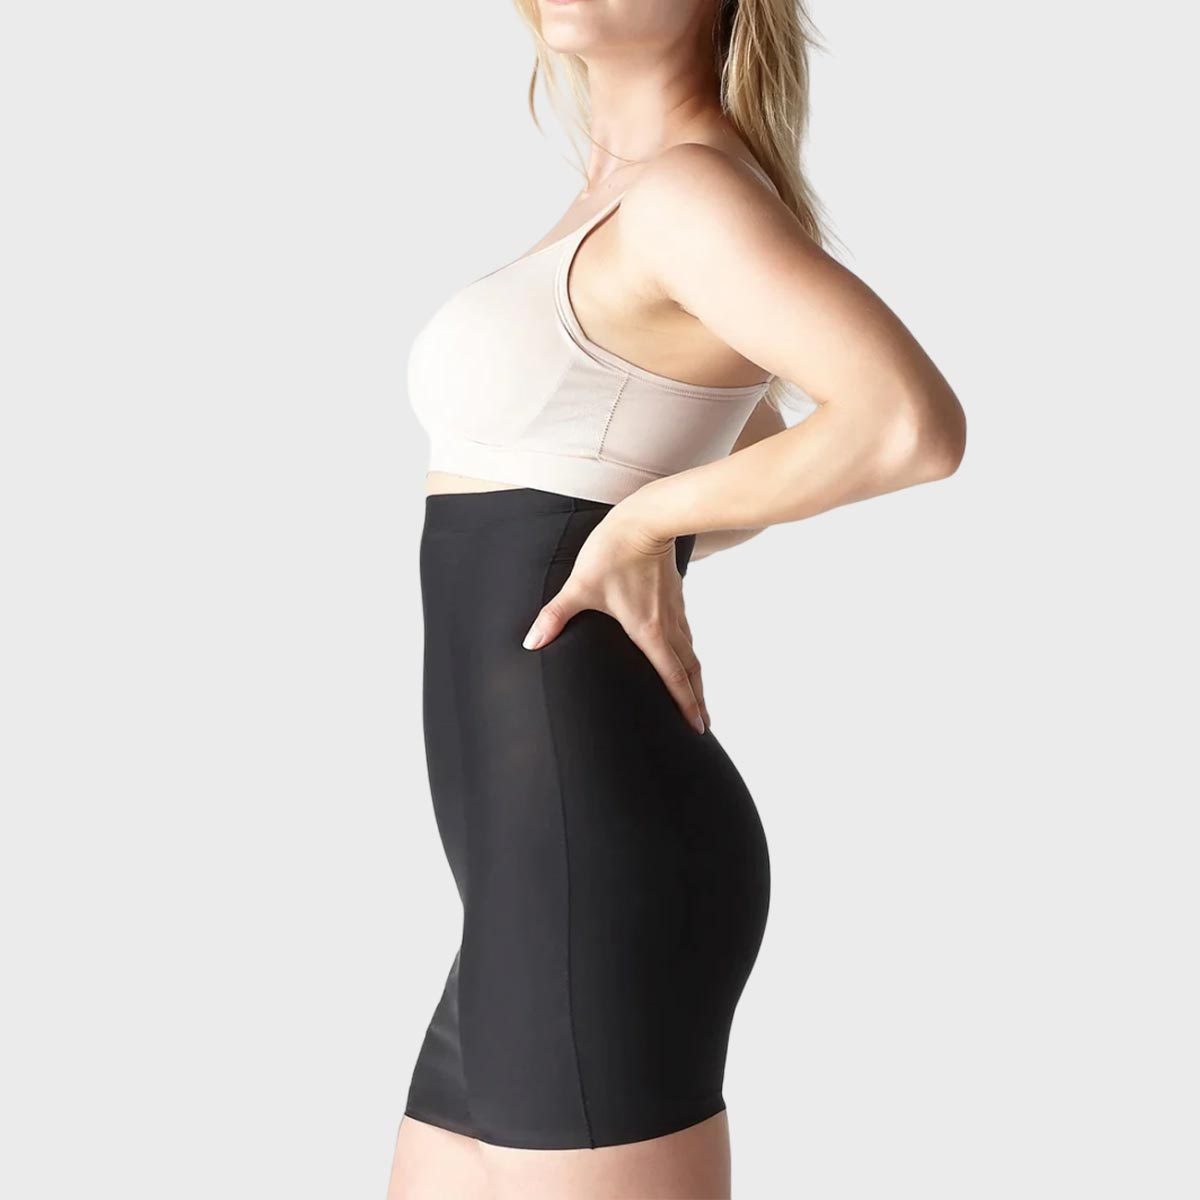 Find Cheap, Fashionable and Slimming shapewear slip with built in